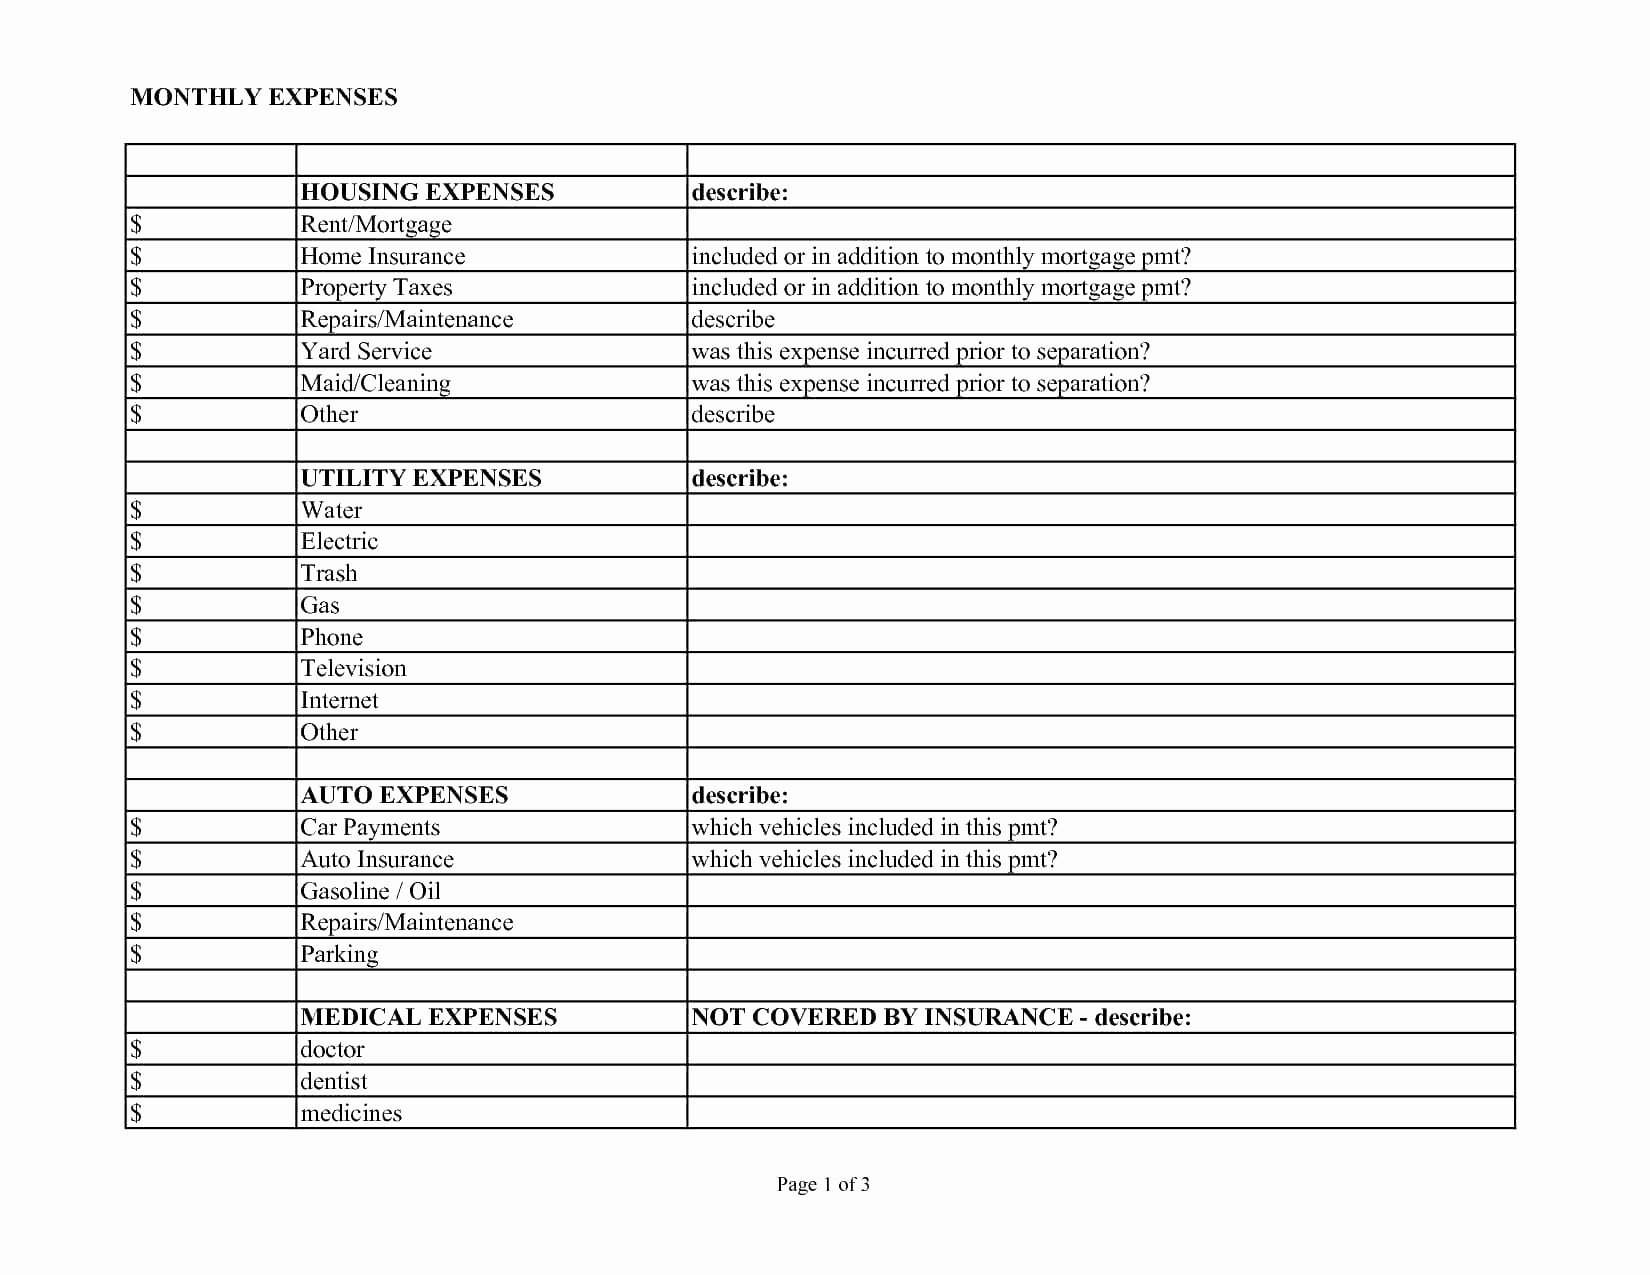 50 Fresh Truck Driver Expense Sheet DOCUMENTS IDEAS Document Schedule C Car And Expenses Worksheet